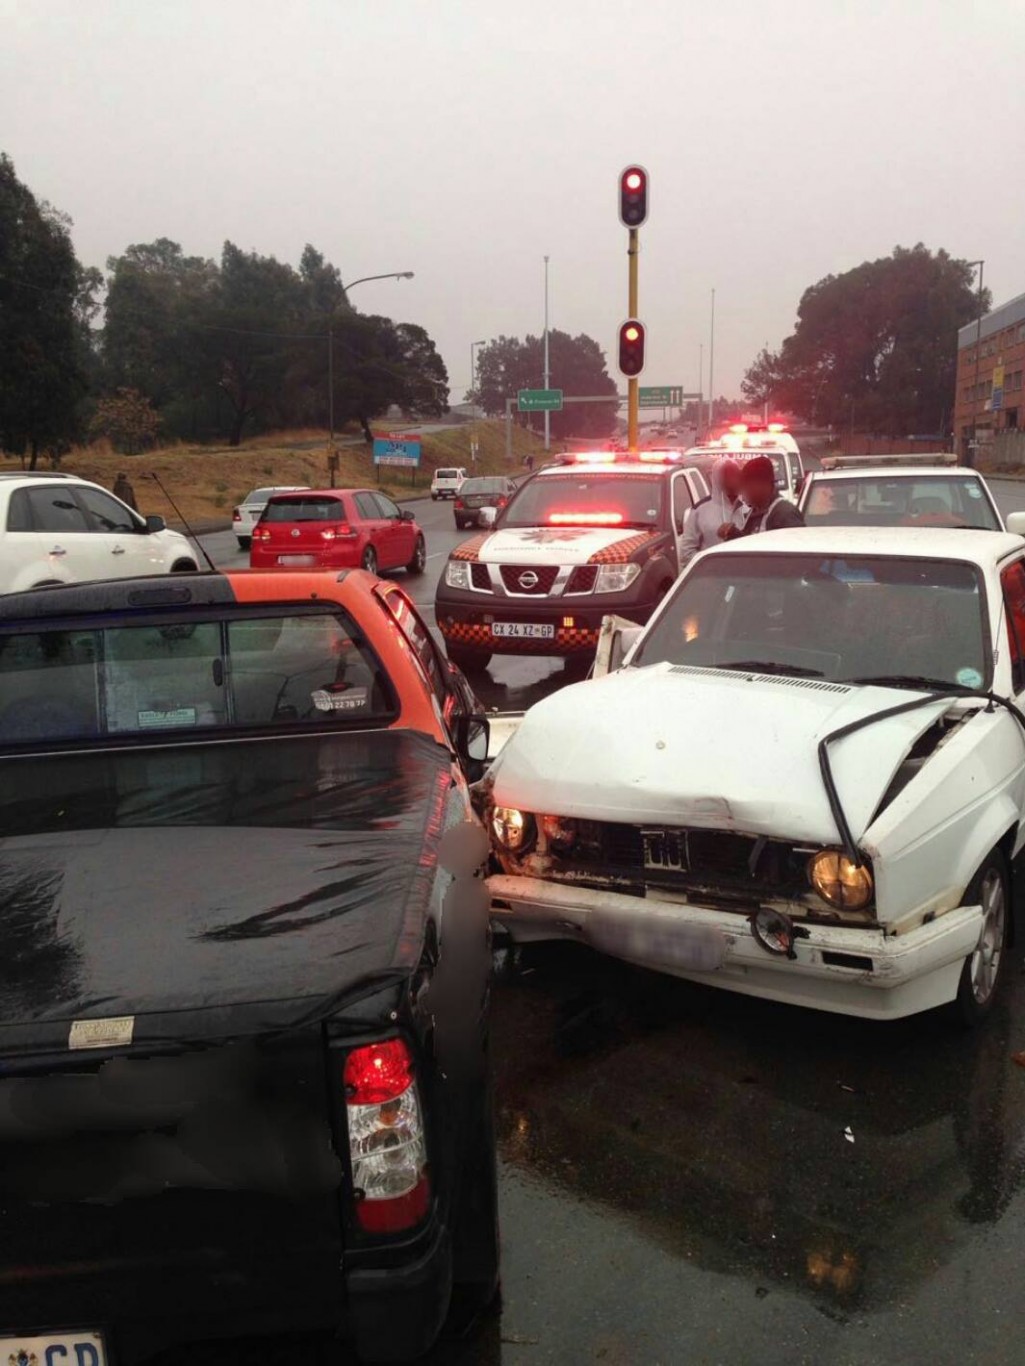 Collision at intersection in Johannesburg South